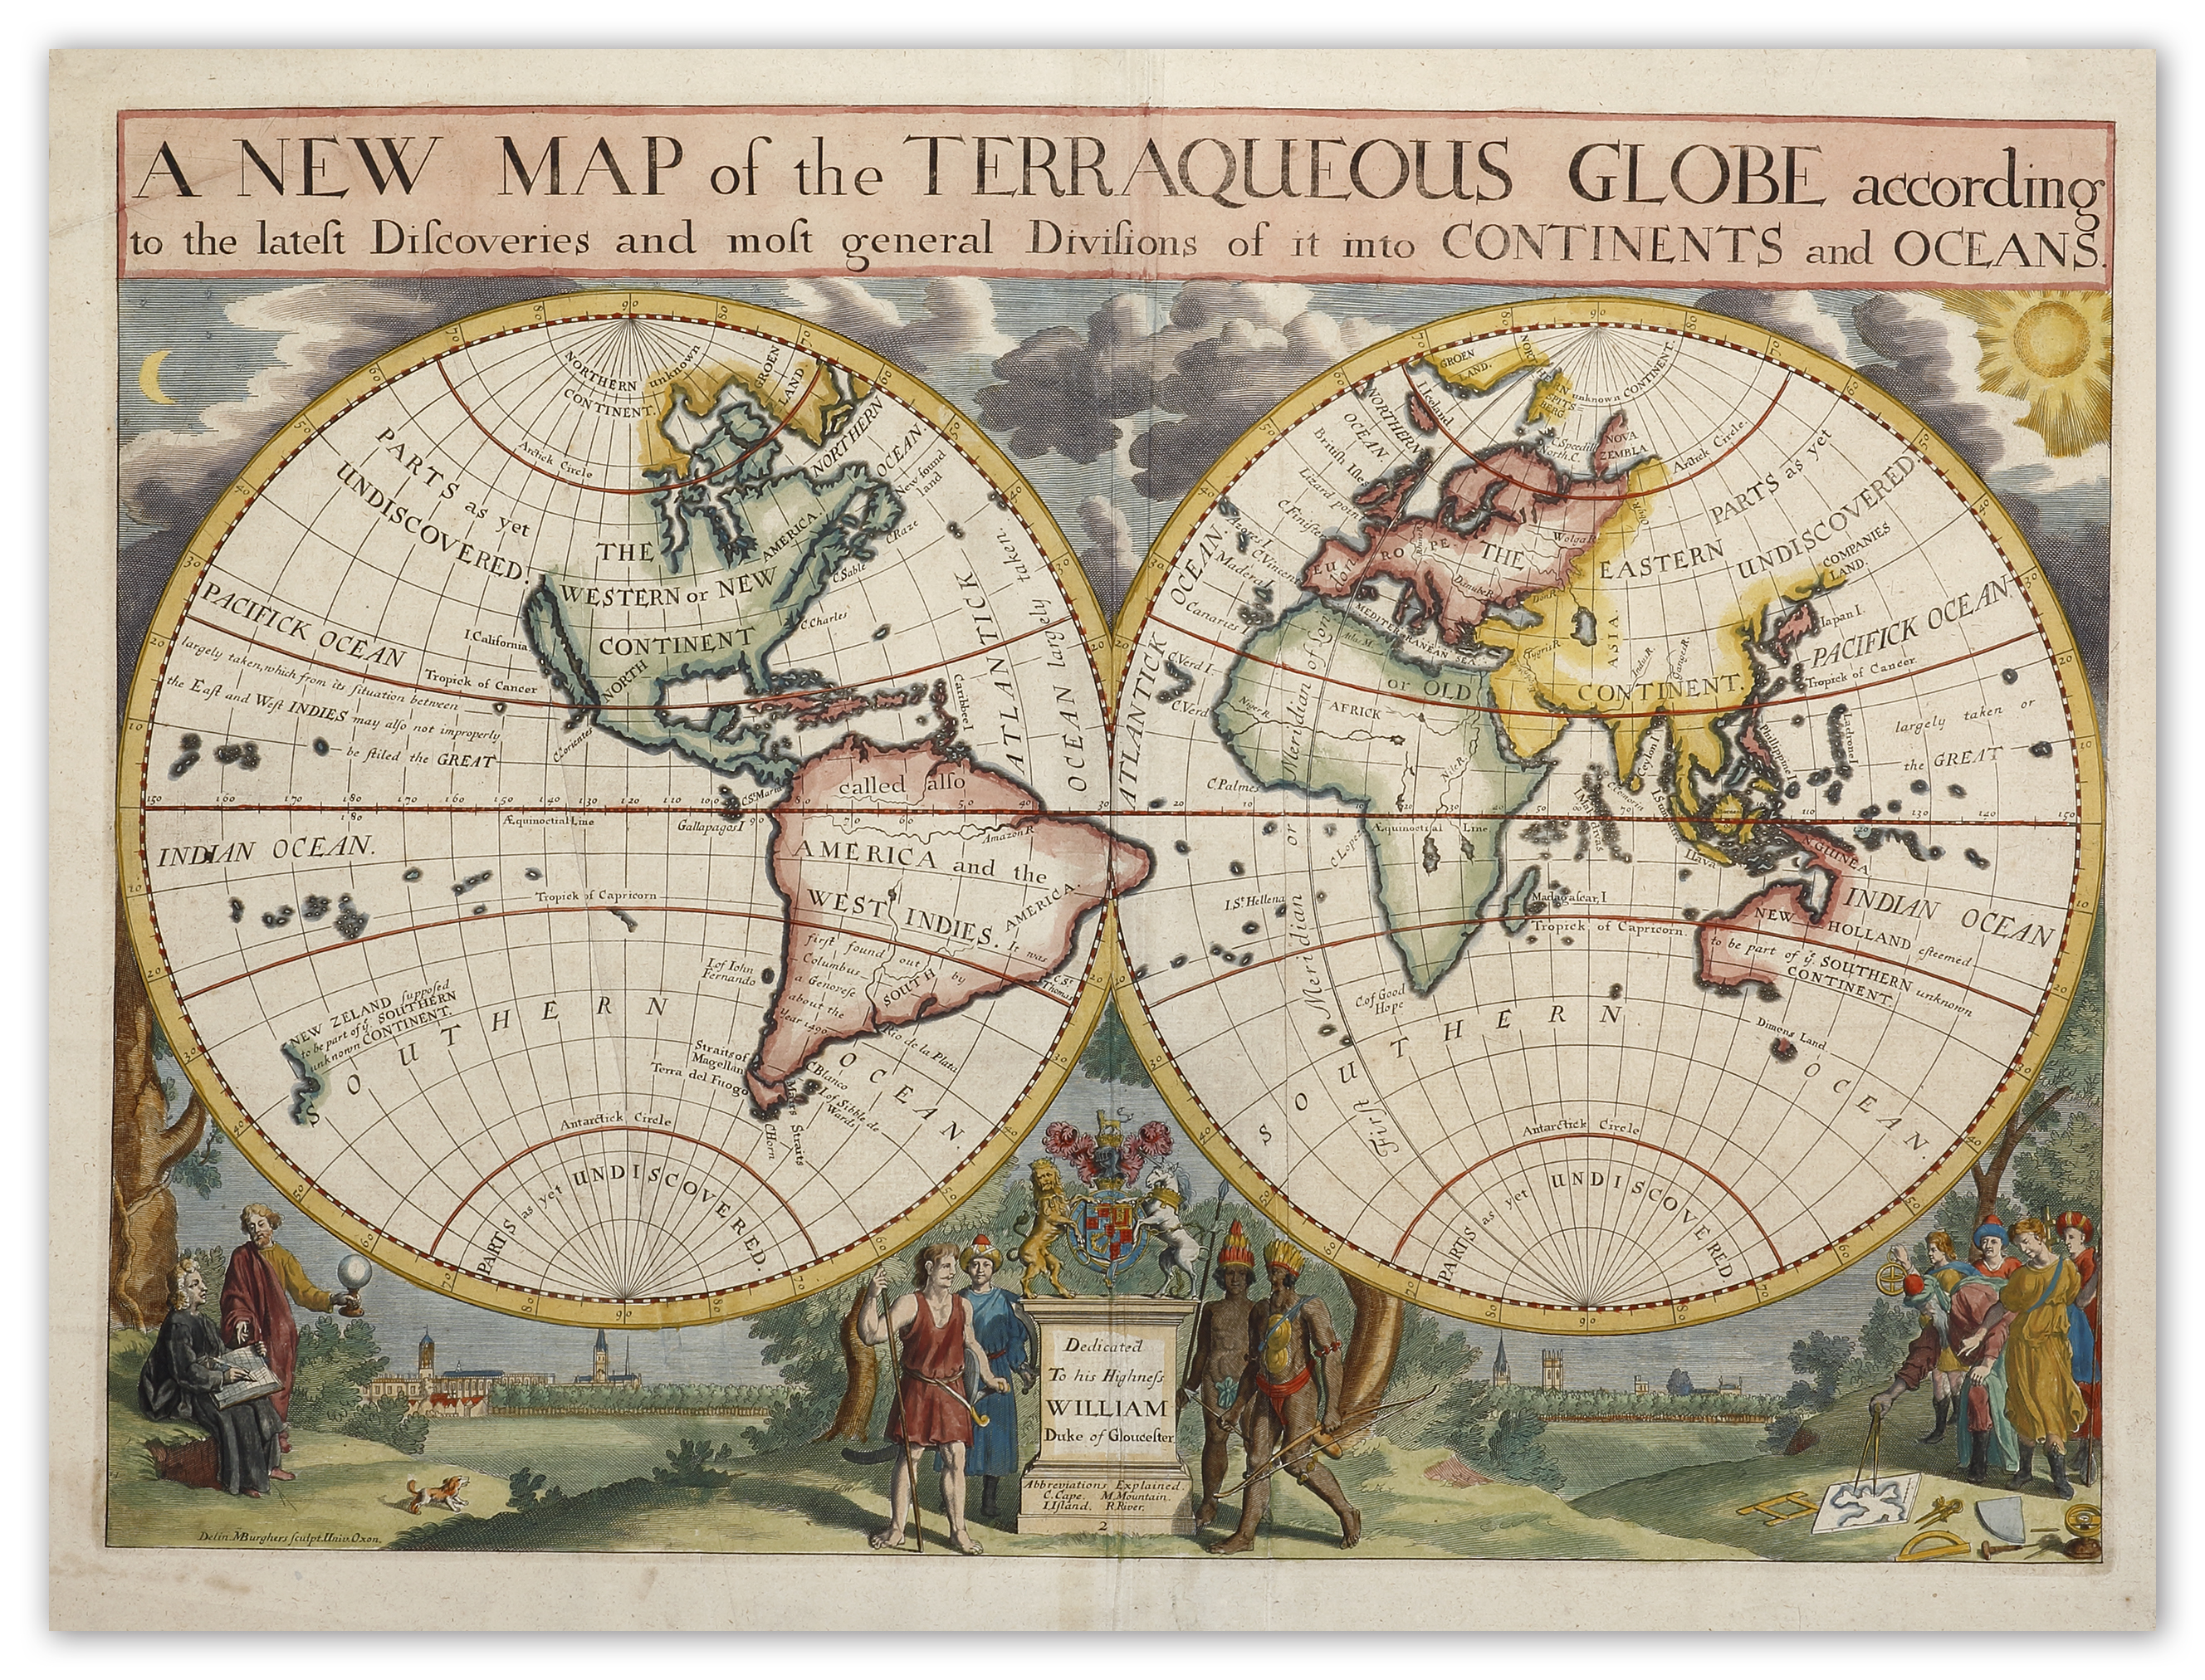 A New Map of the Terraqueous Globe according to the latest and most general Divisions of it into Continents and Oceans. - Antique Map from 1700